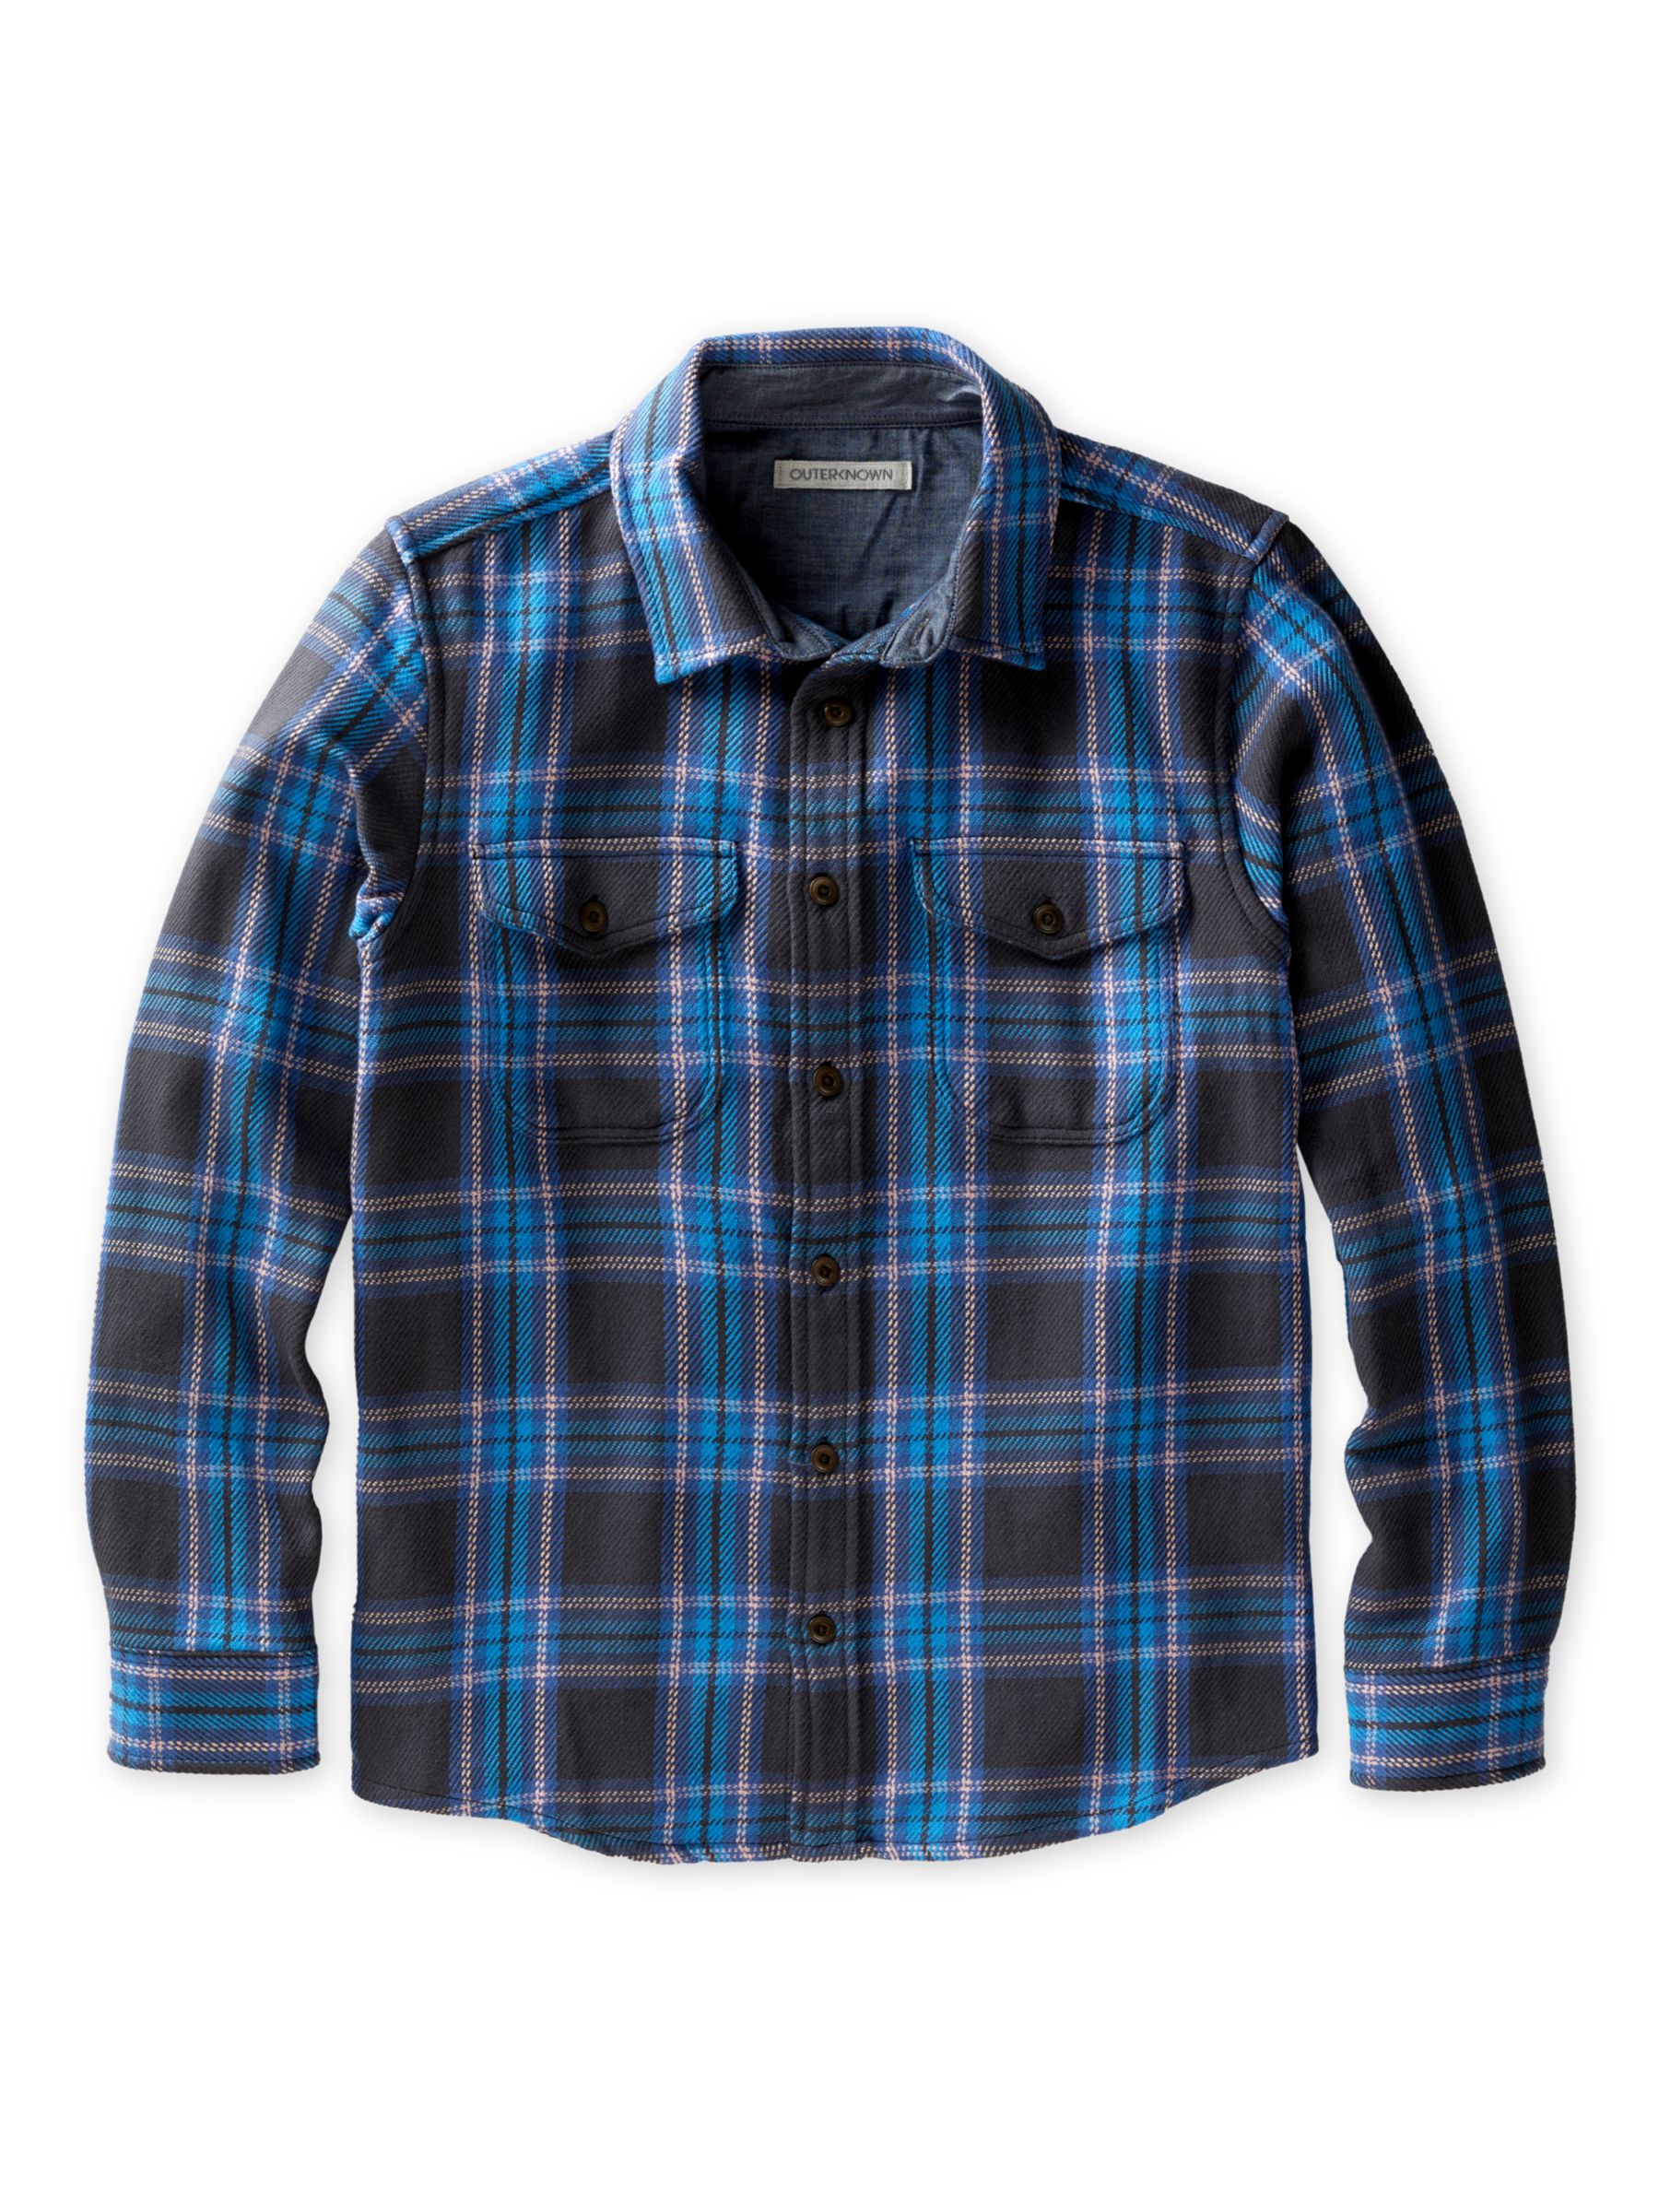 Outerknown Soft Sustainable Check Shirt, Shadow High Valley at John ...